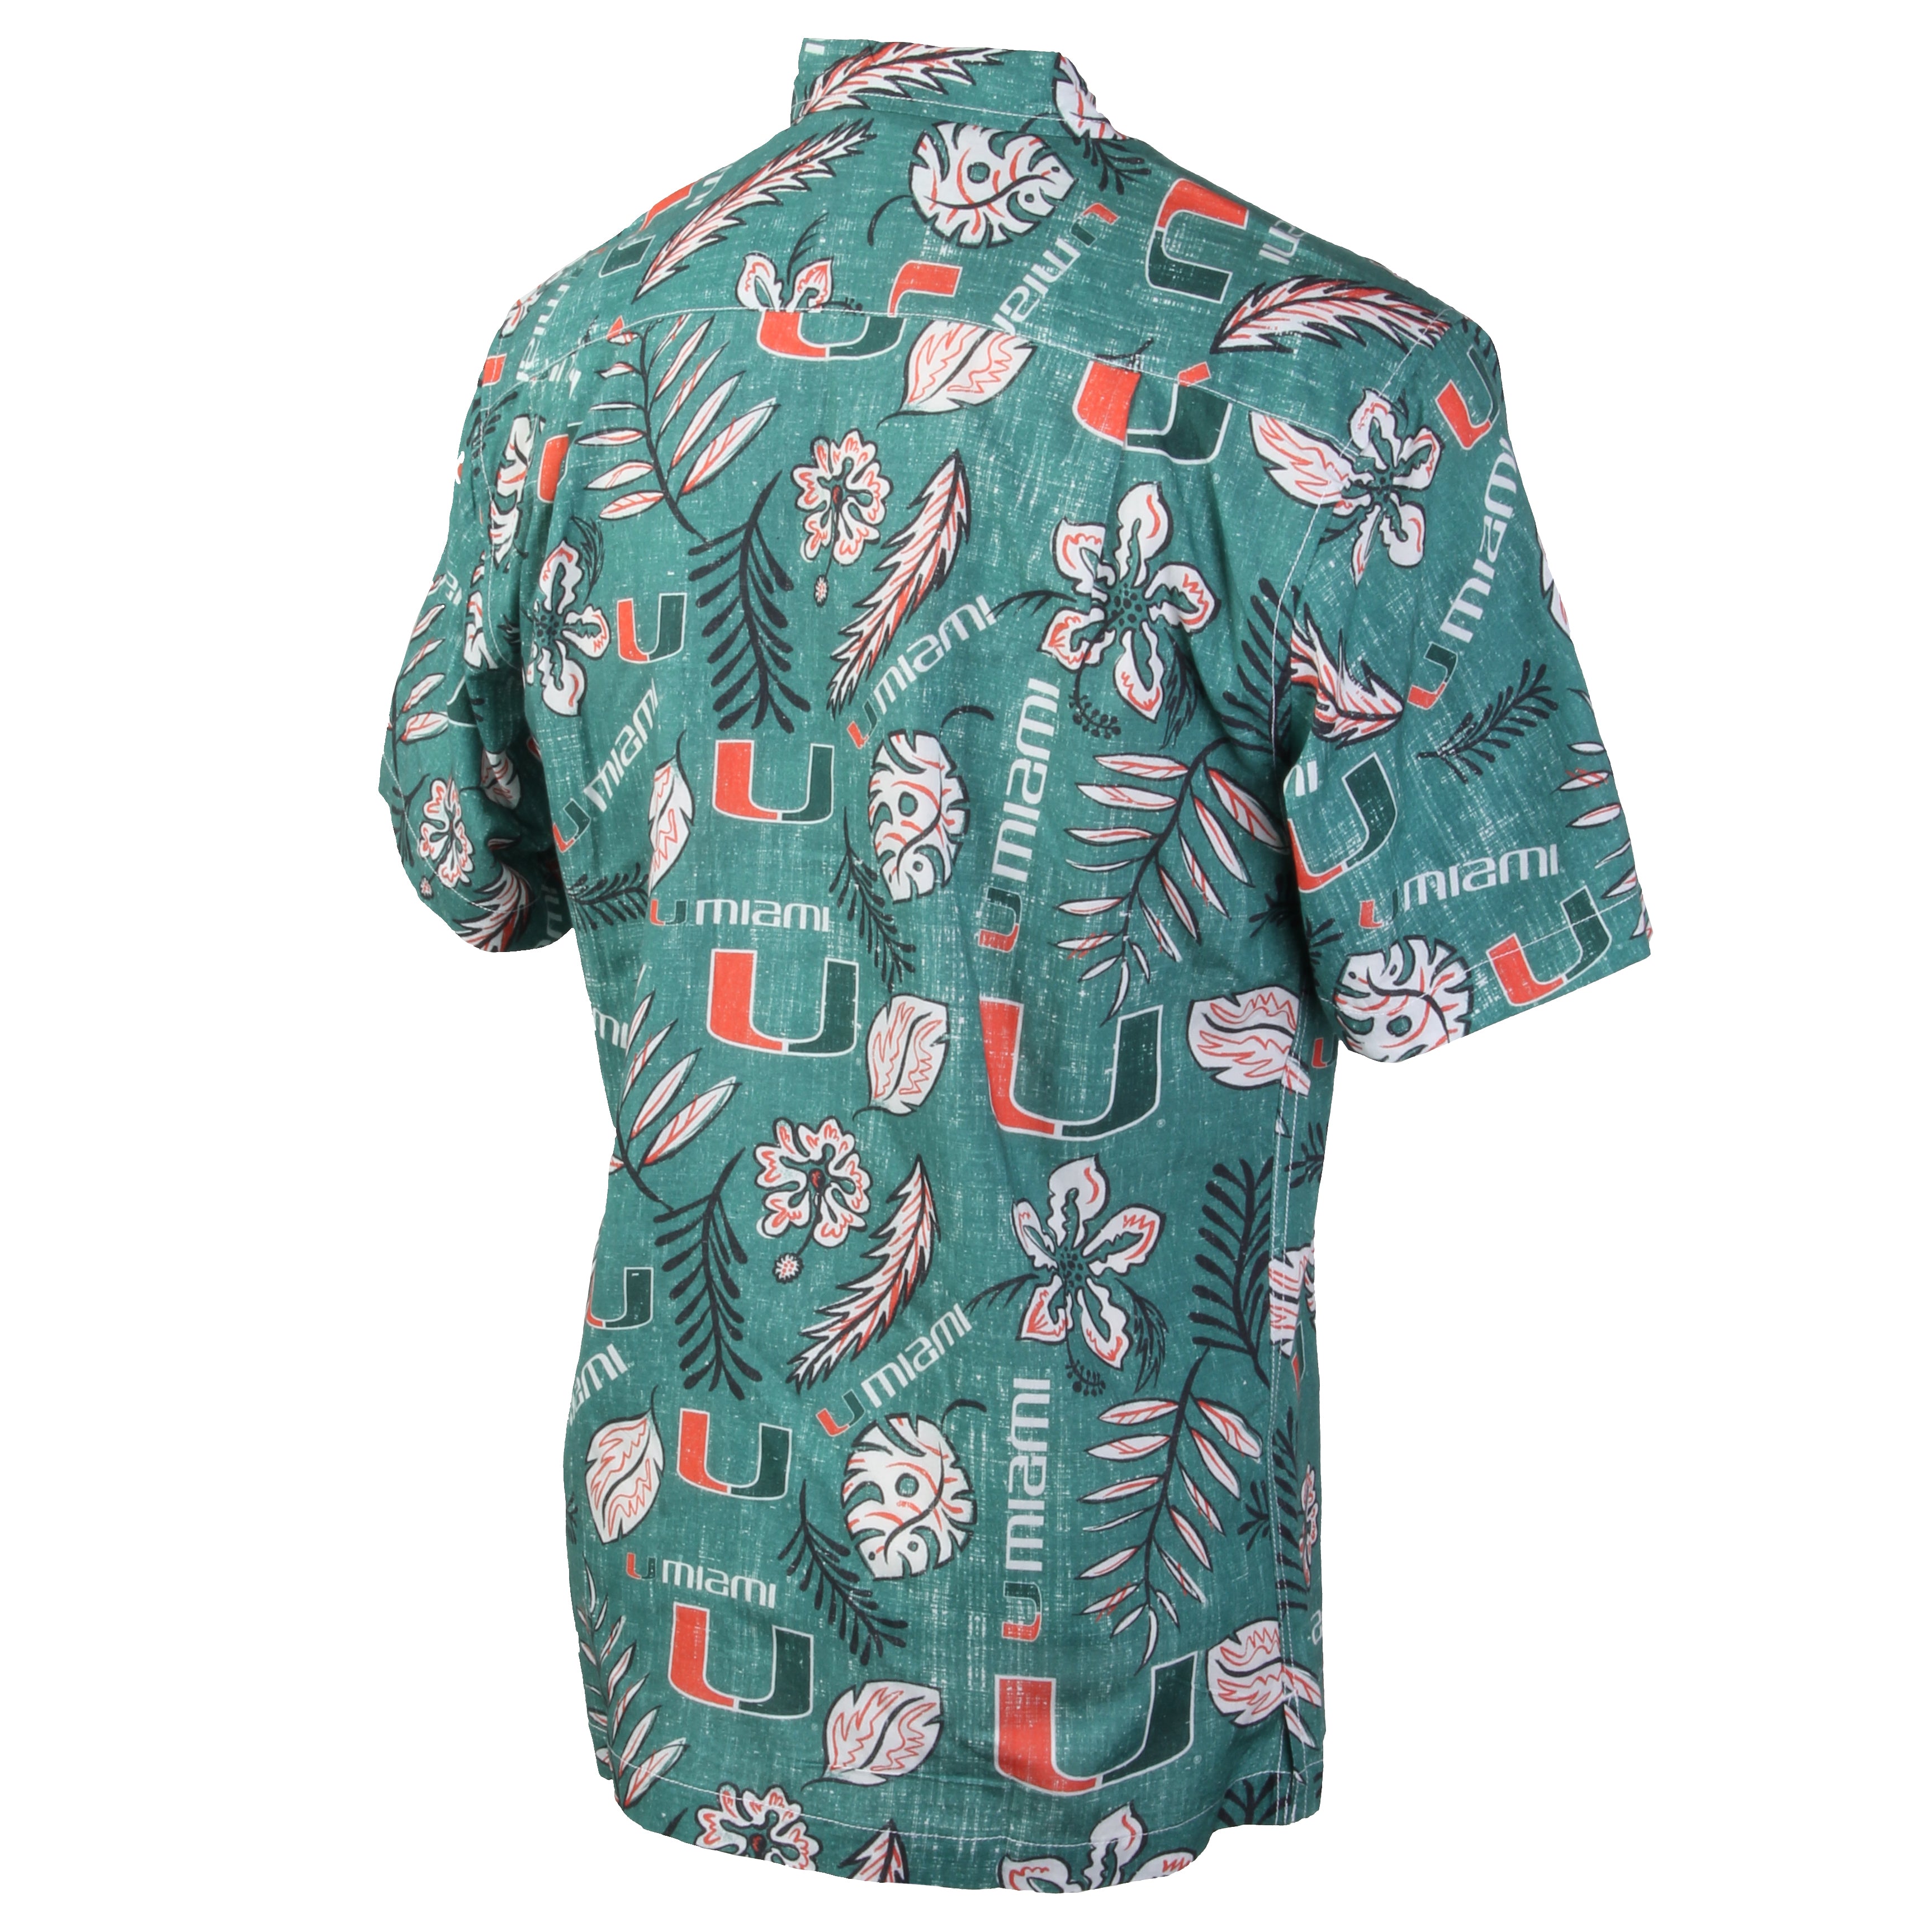 Miami Hurricanes Vintage Floral Button Up Evergreen Shirt - Green